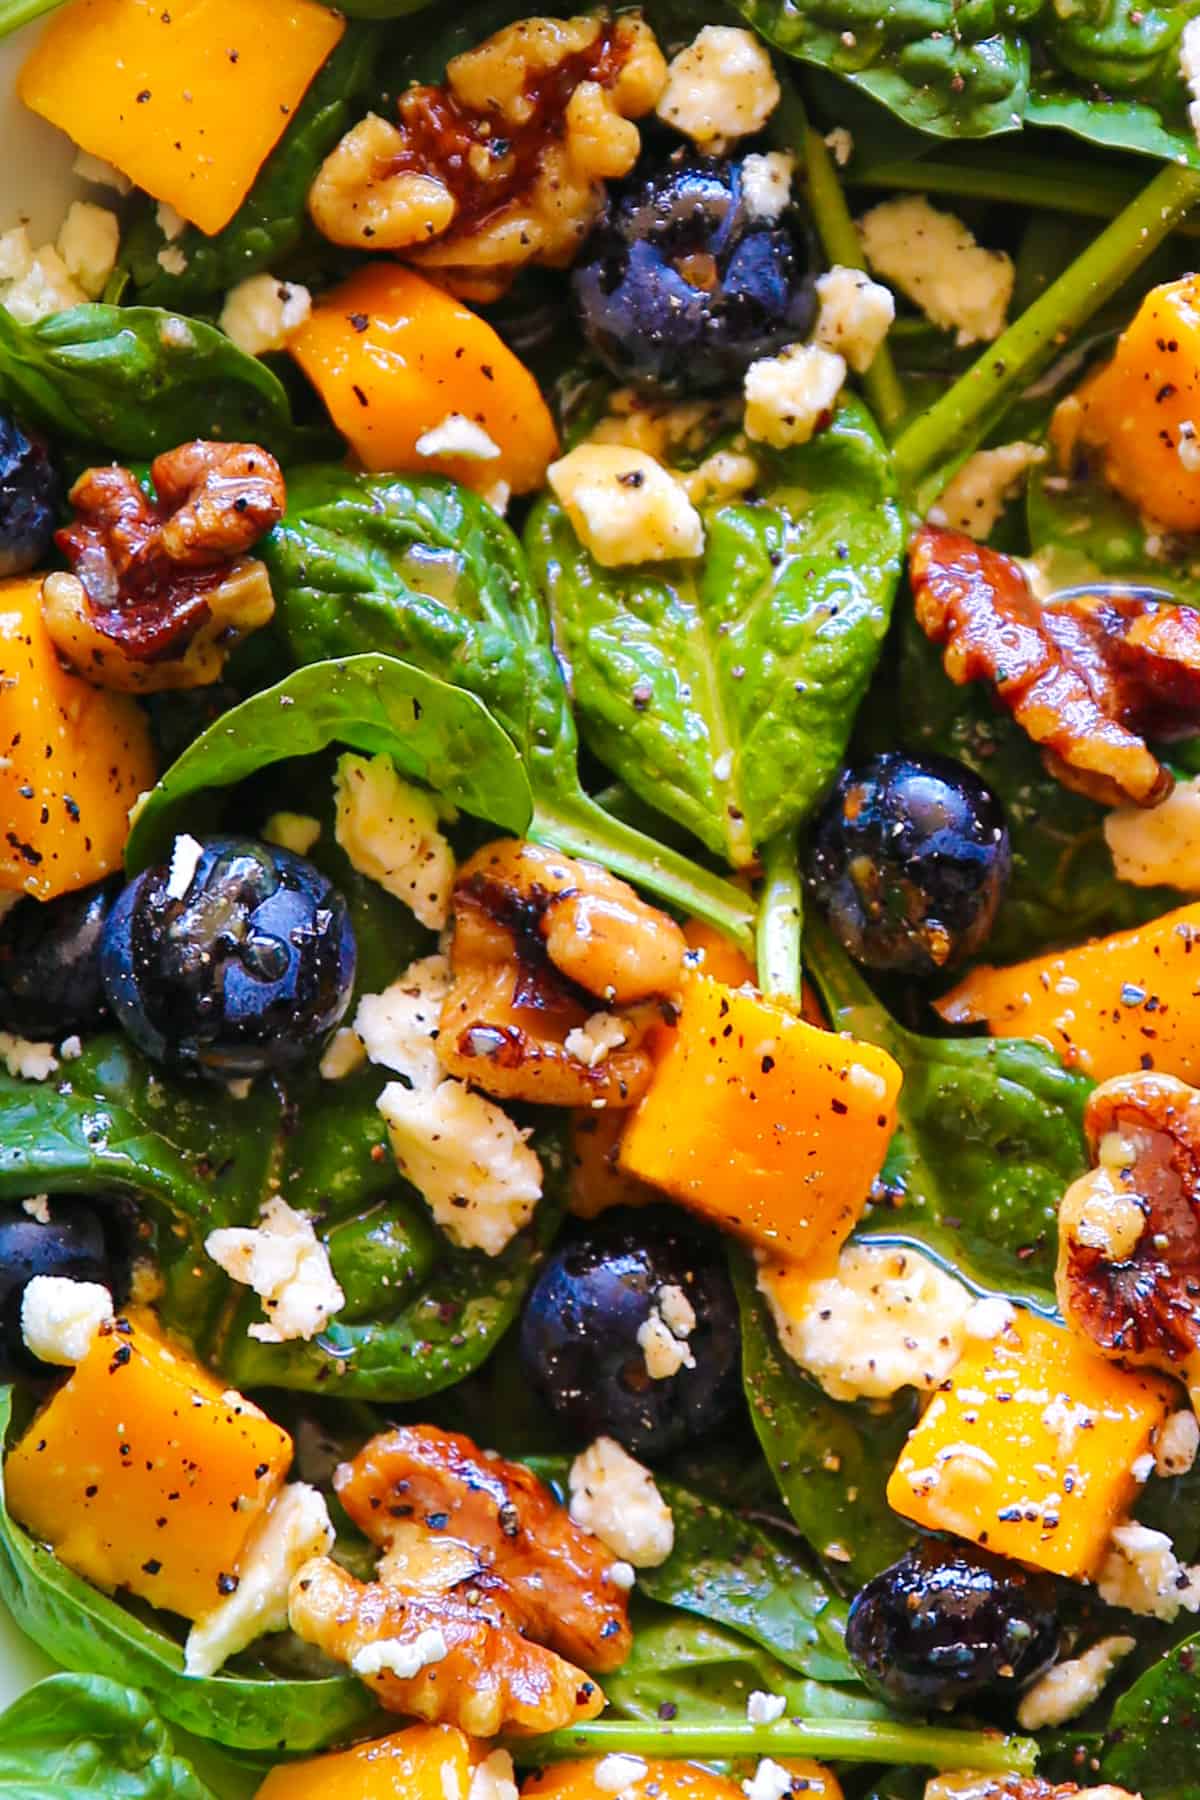 Mango Salad with Spinach, Blueberries, Walnuts, and Feta Cheese - close-up photo.